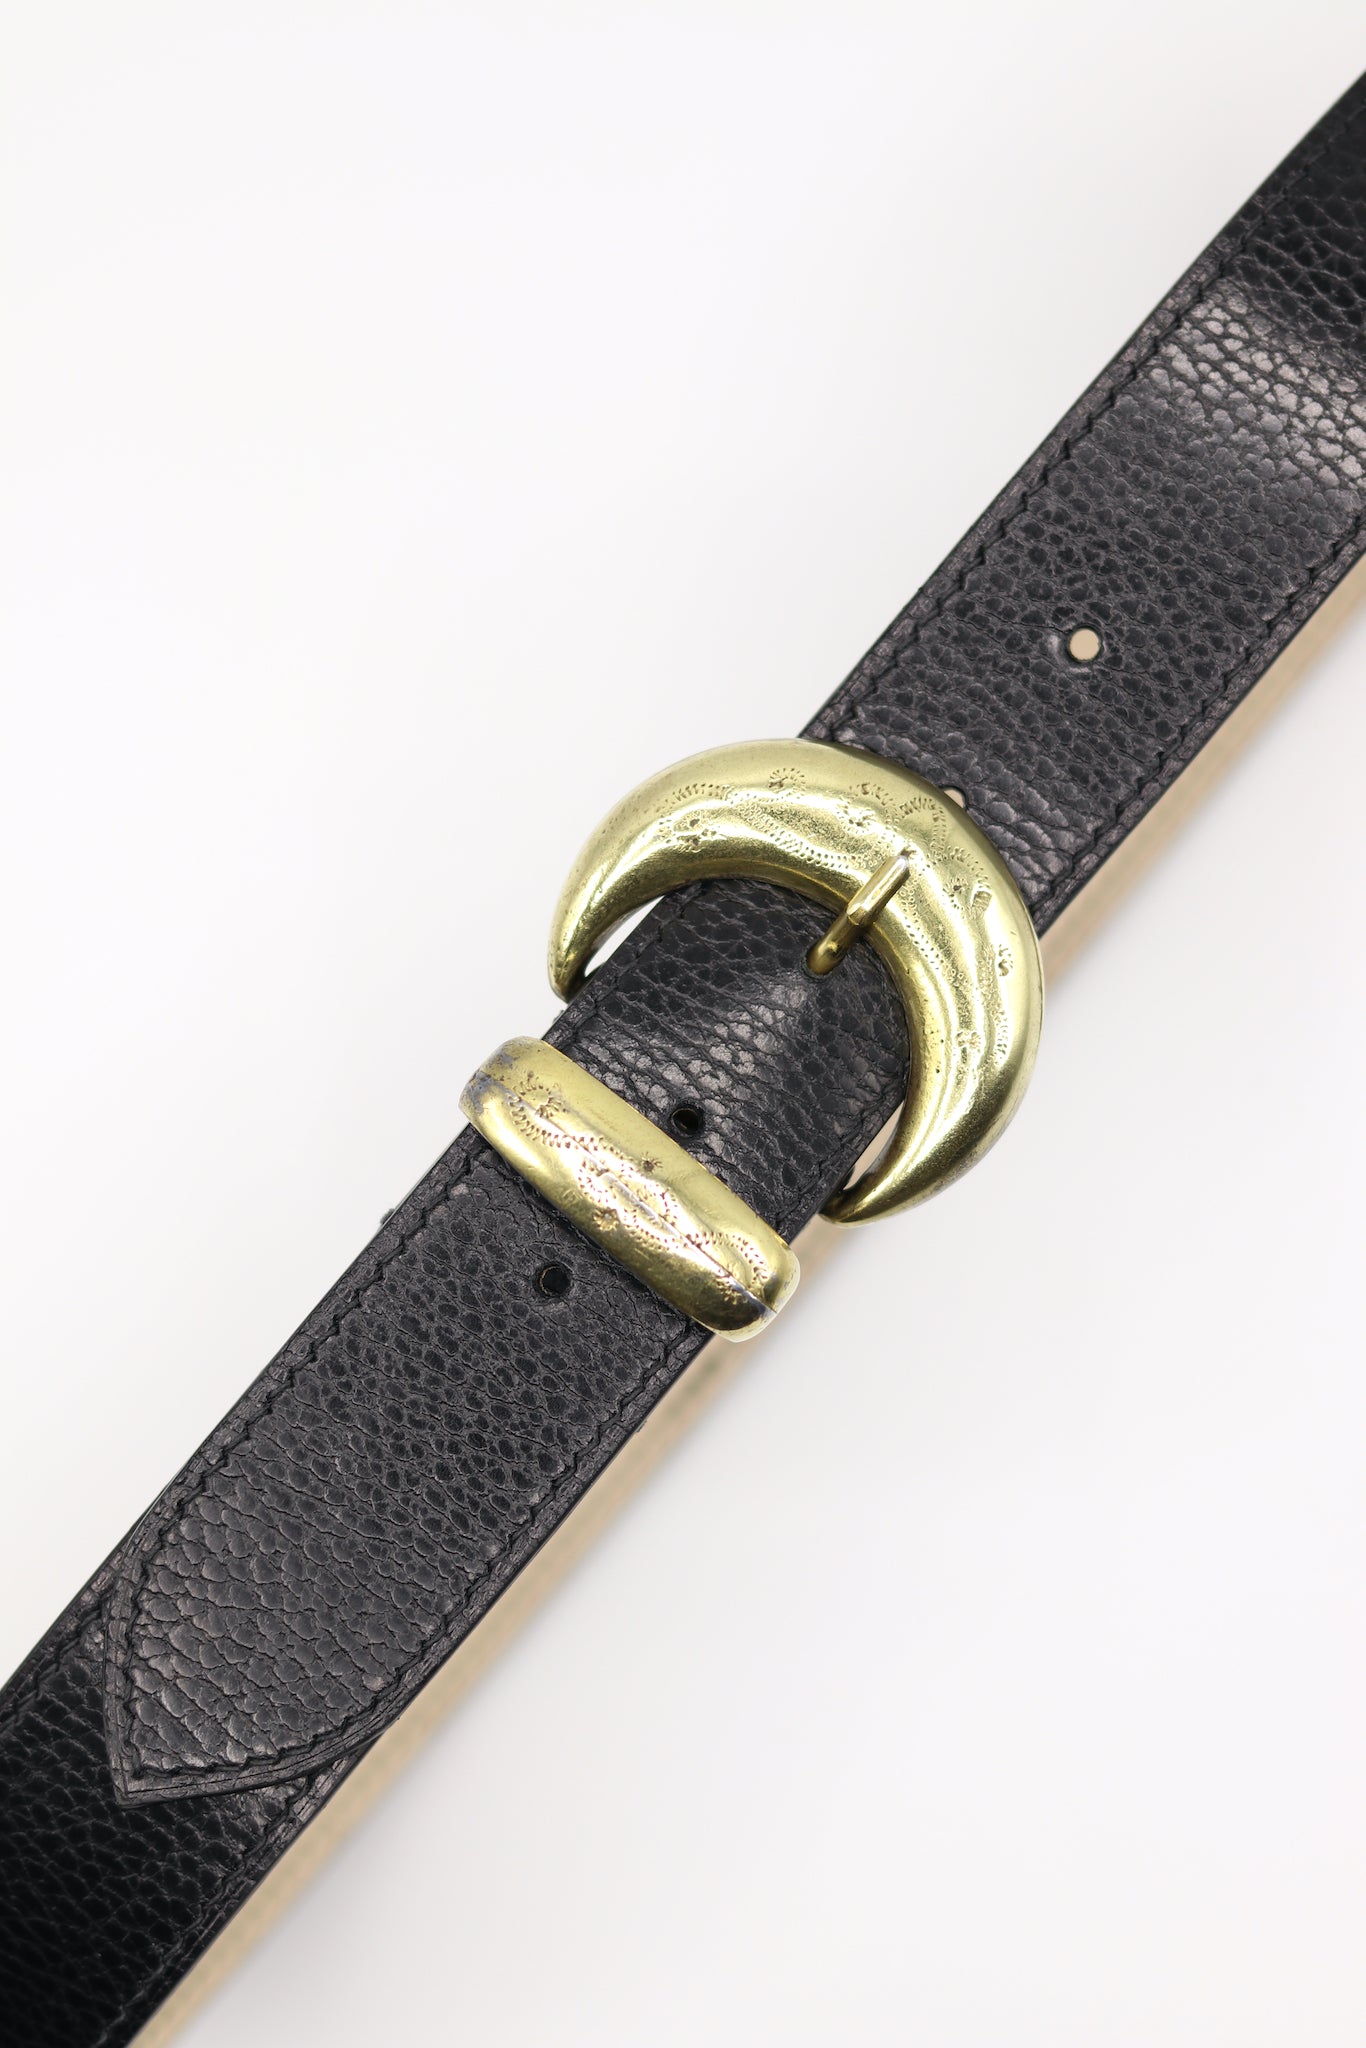 Dollaro Vegetable Tanned Leather on Solid Brass